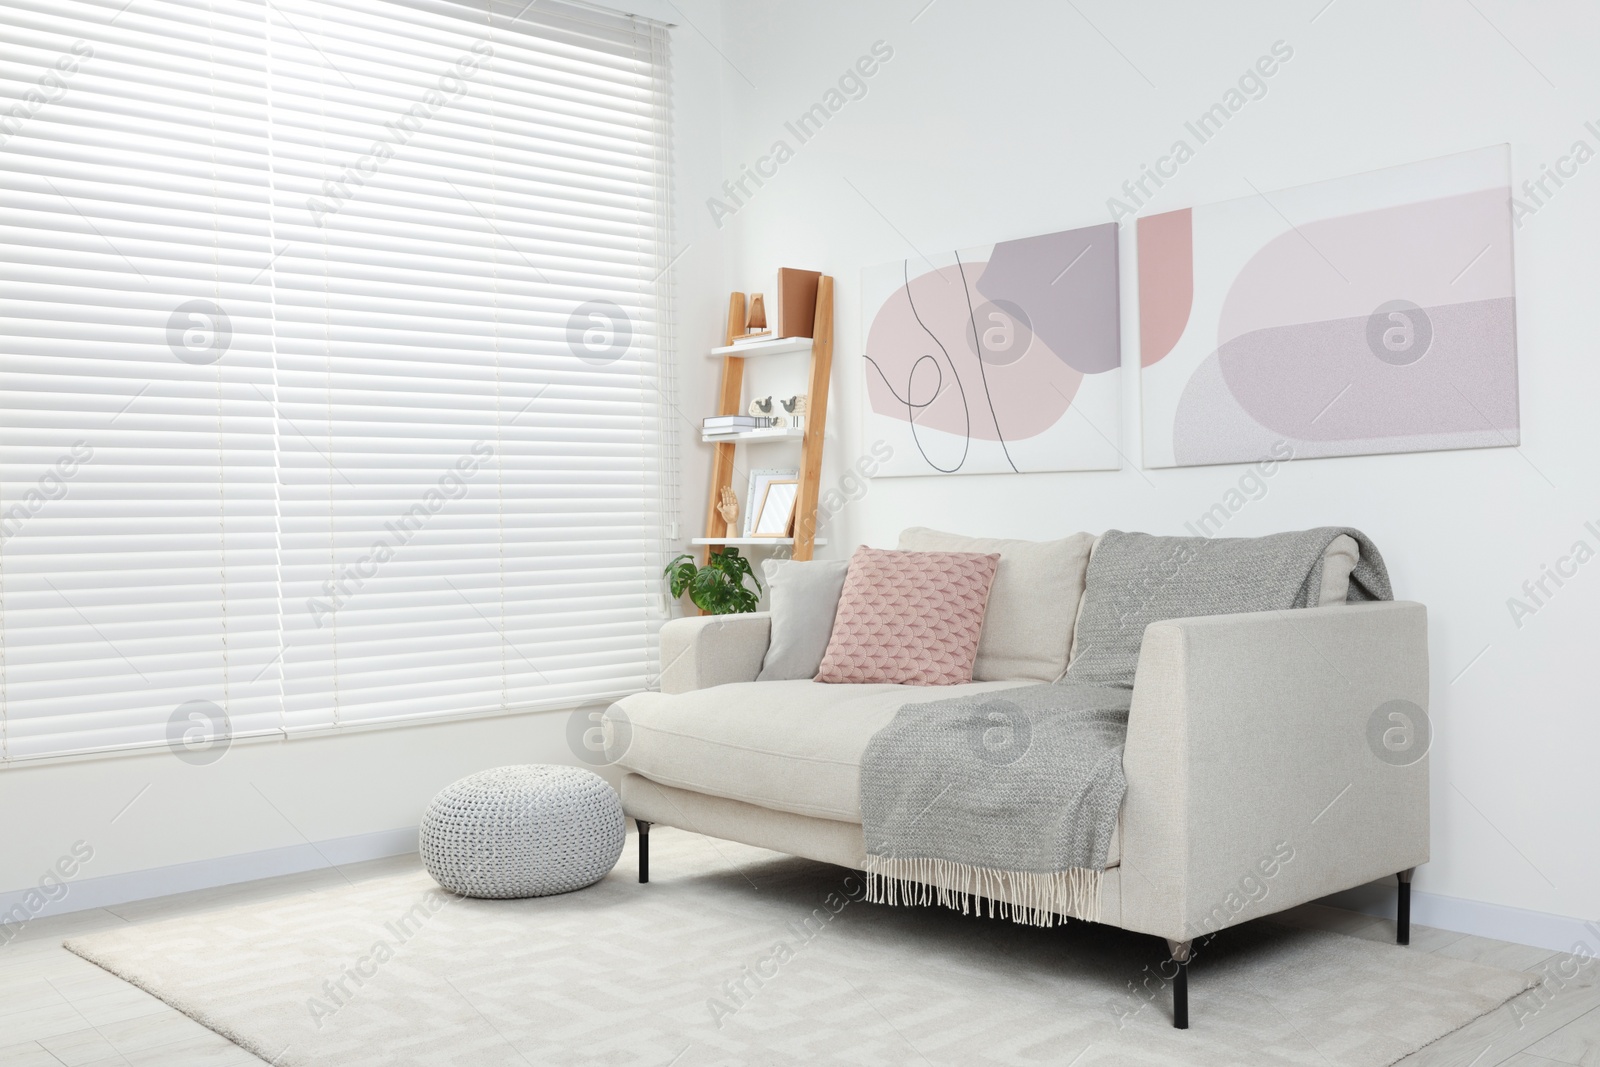 Photo of Stylish room interior with comfortable sofa, wooden shelf and pillows